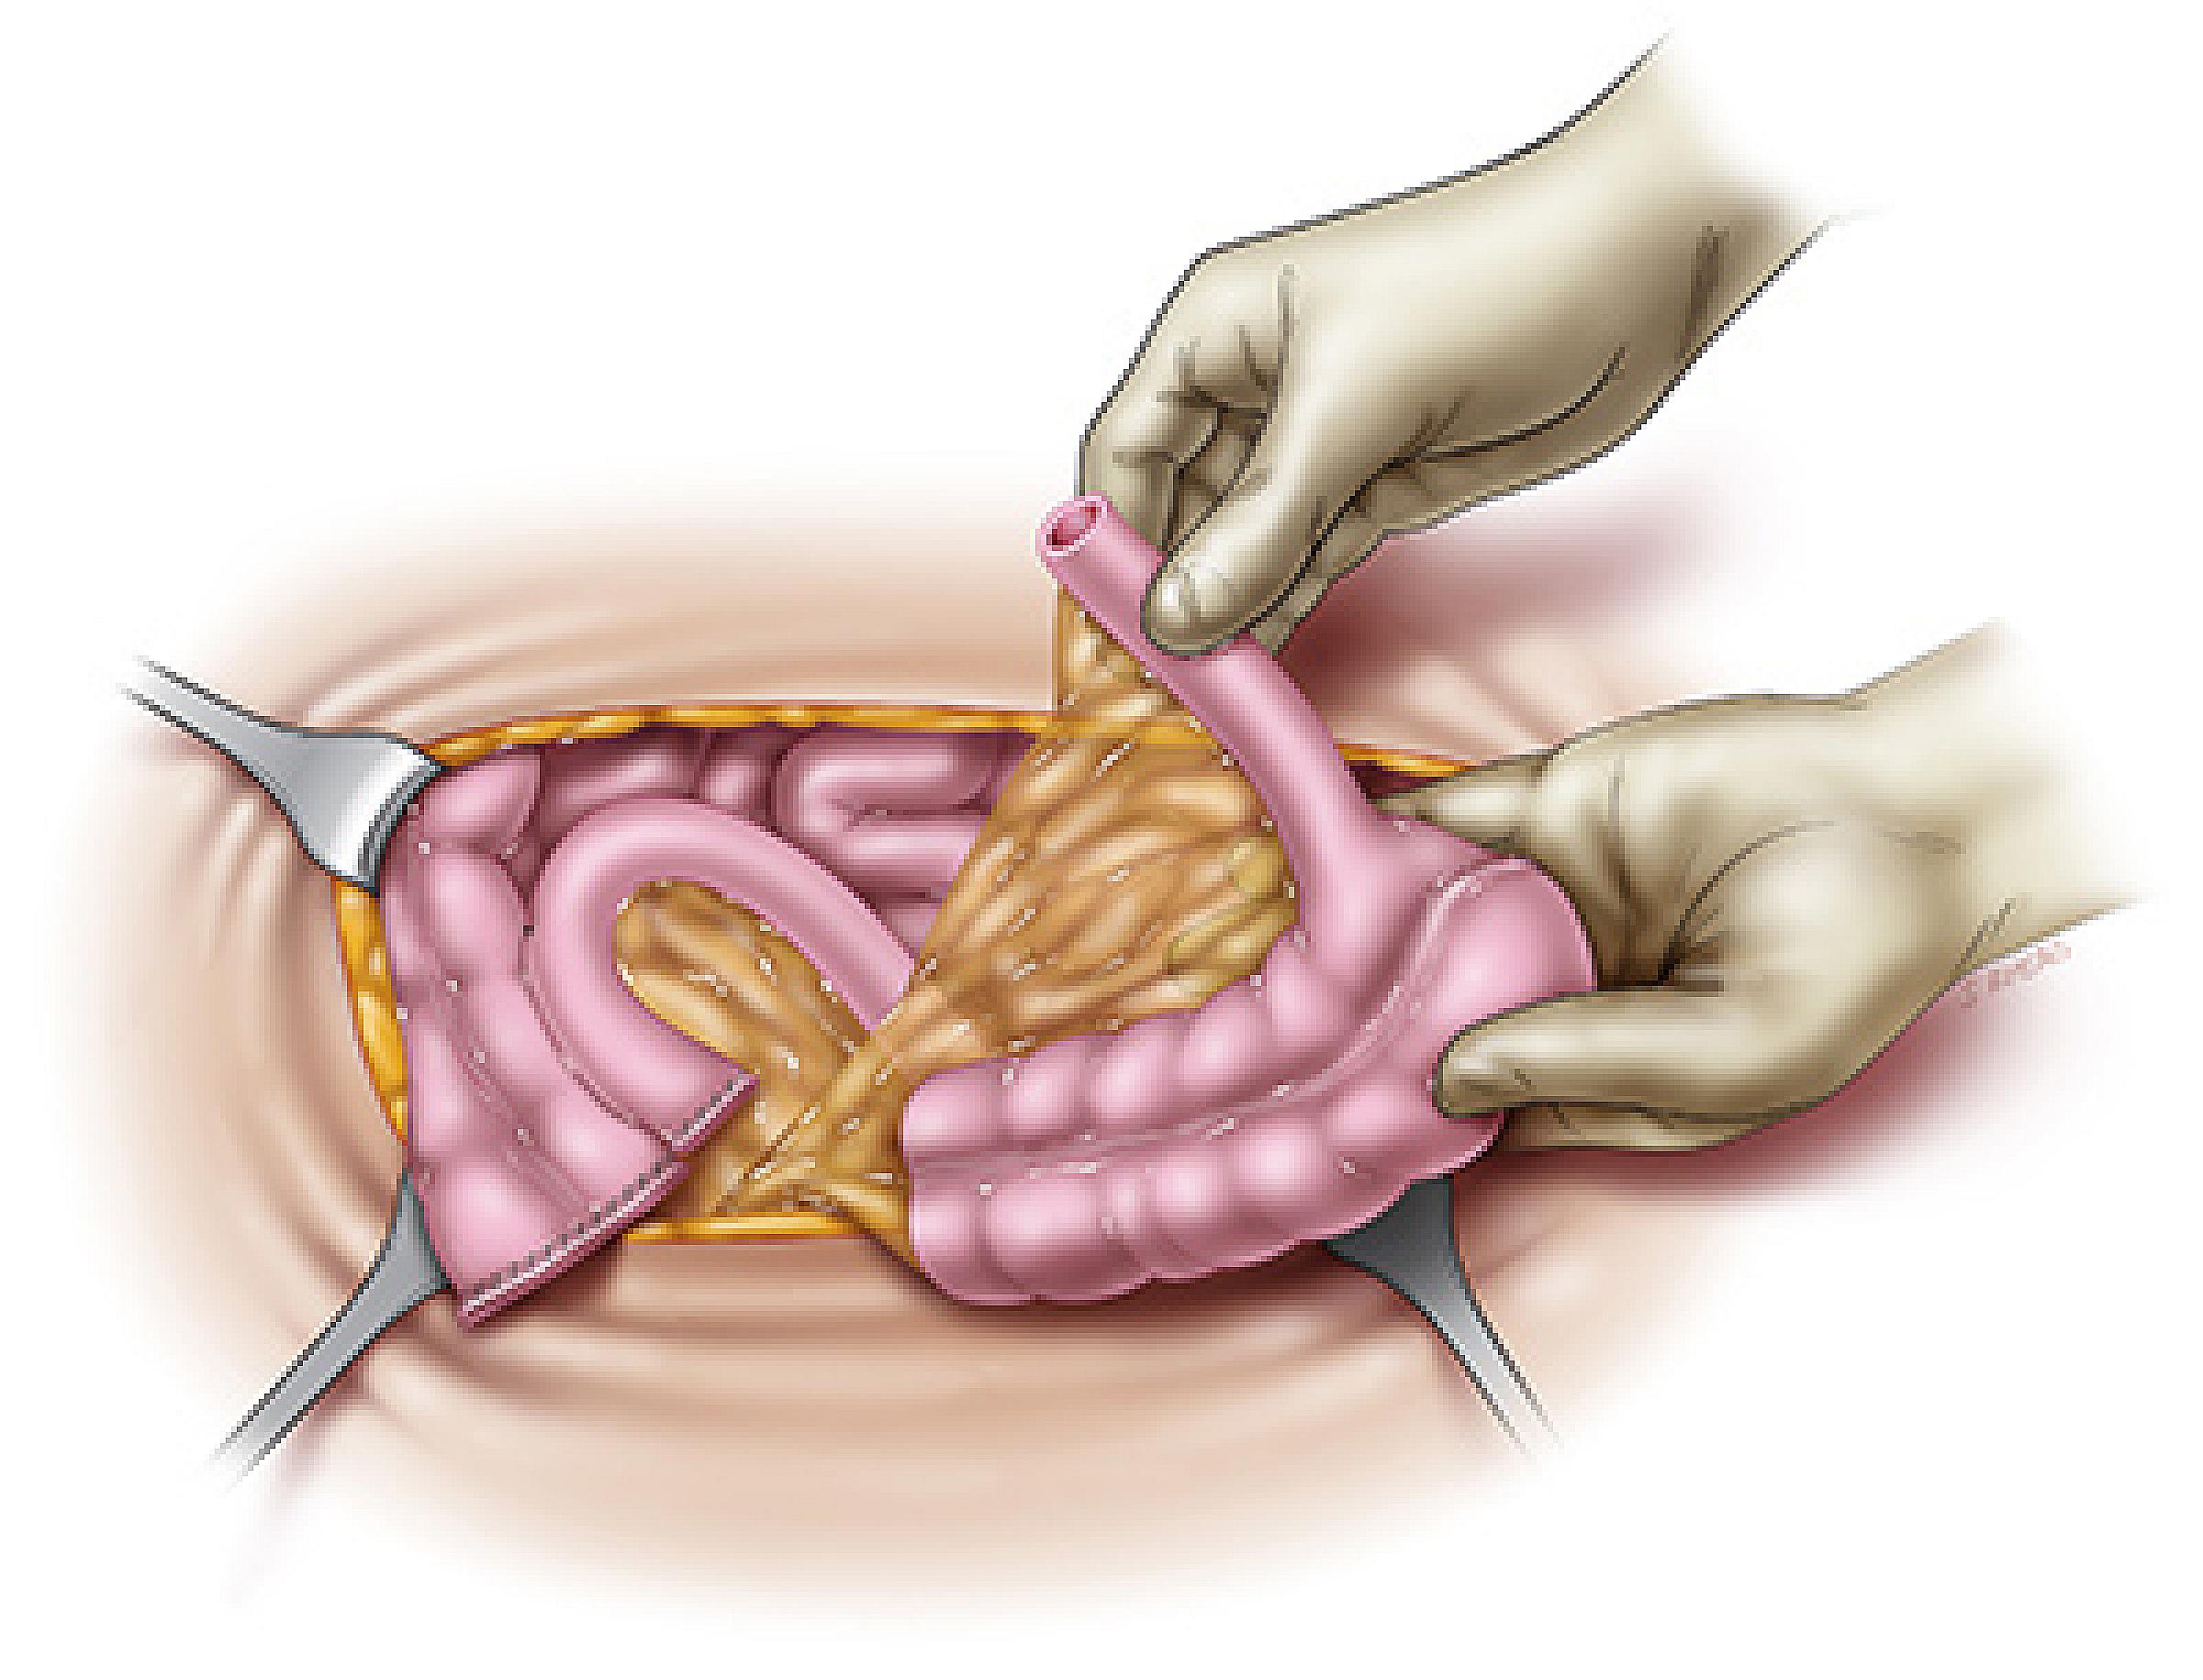 An illustration of the incision for the procedure